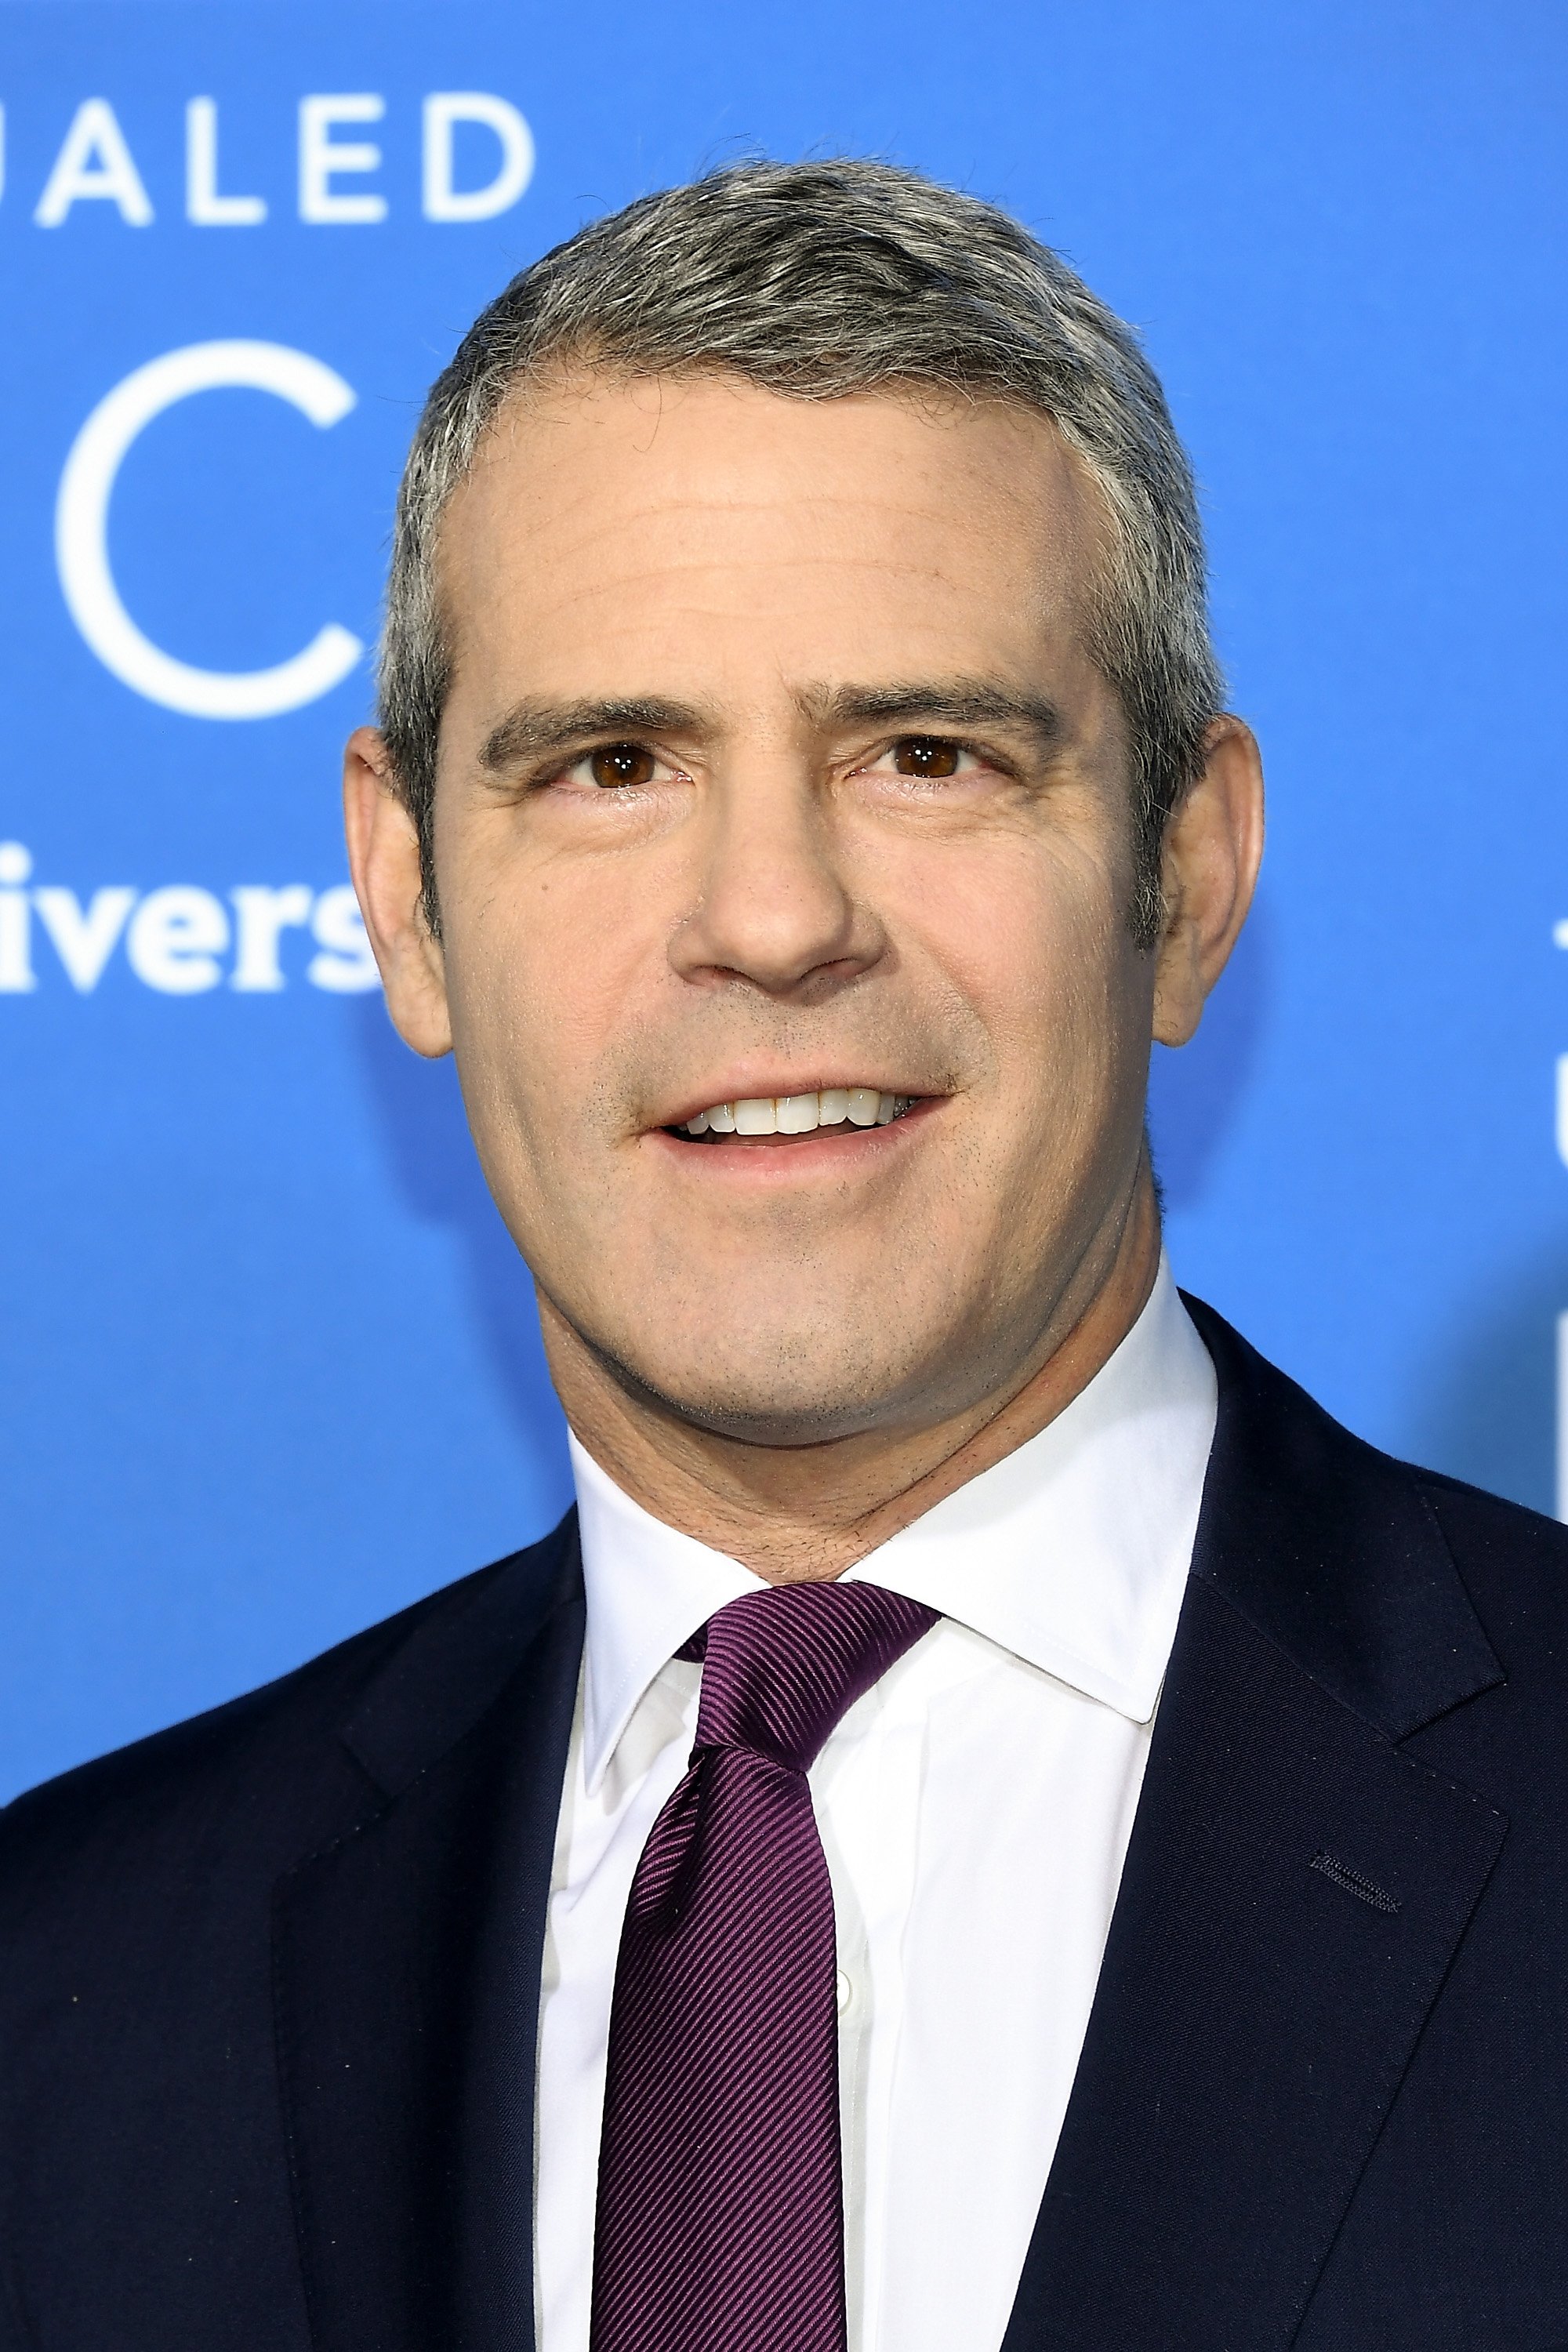 Andy Cohen pictured at the 2017 NBCUniversal Upfront at Radio City Music Hall, 2017, New York City. | Getty Images